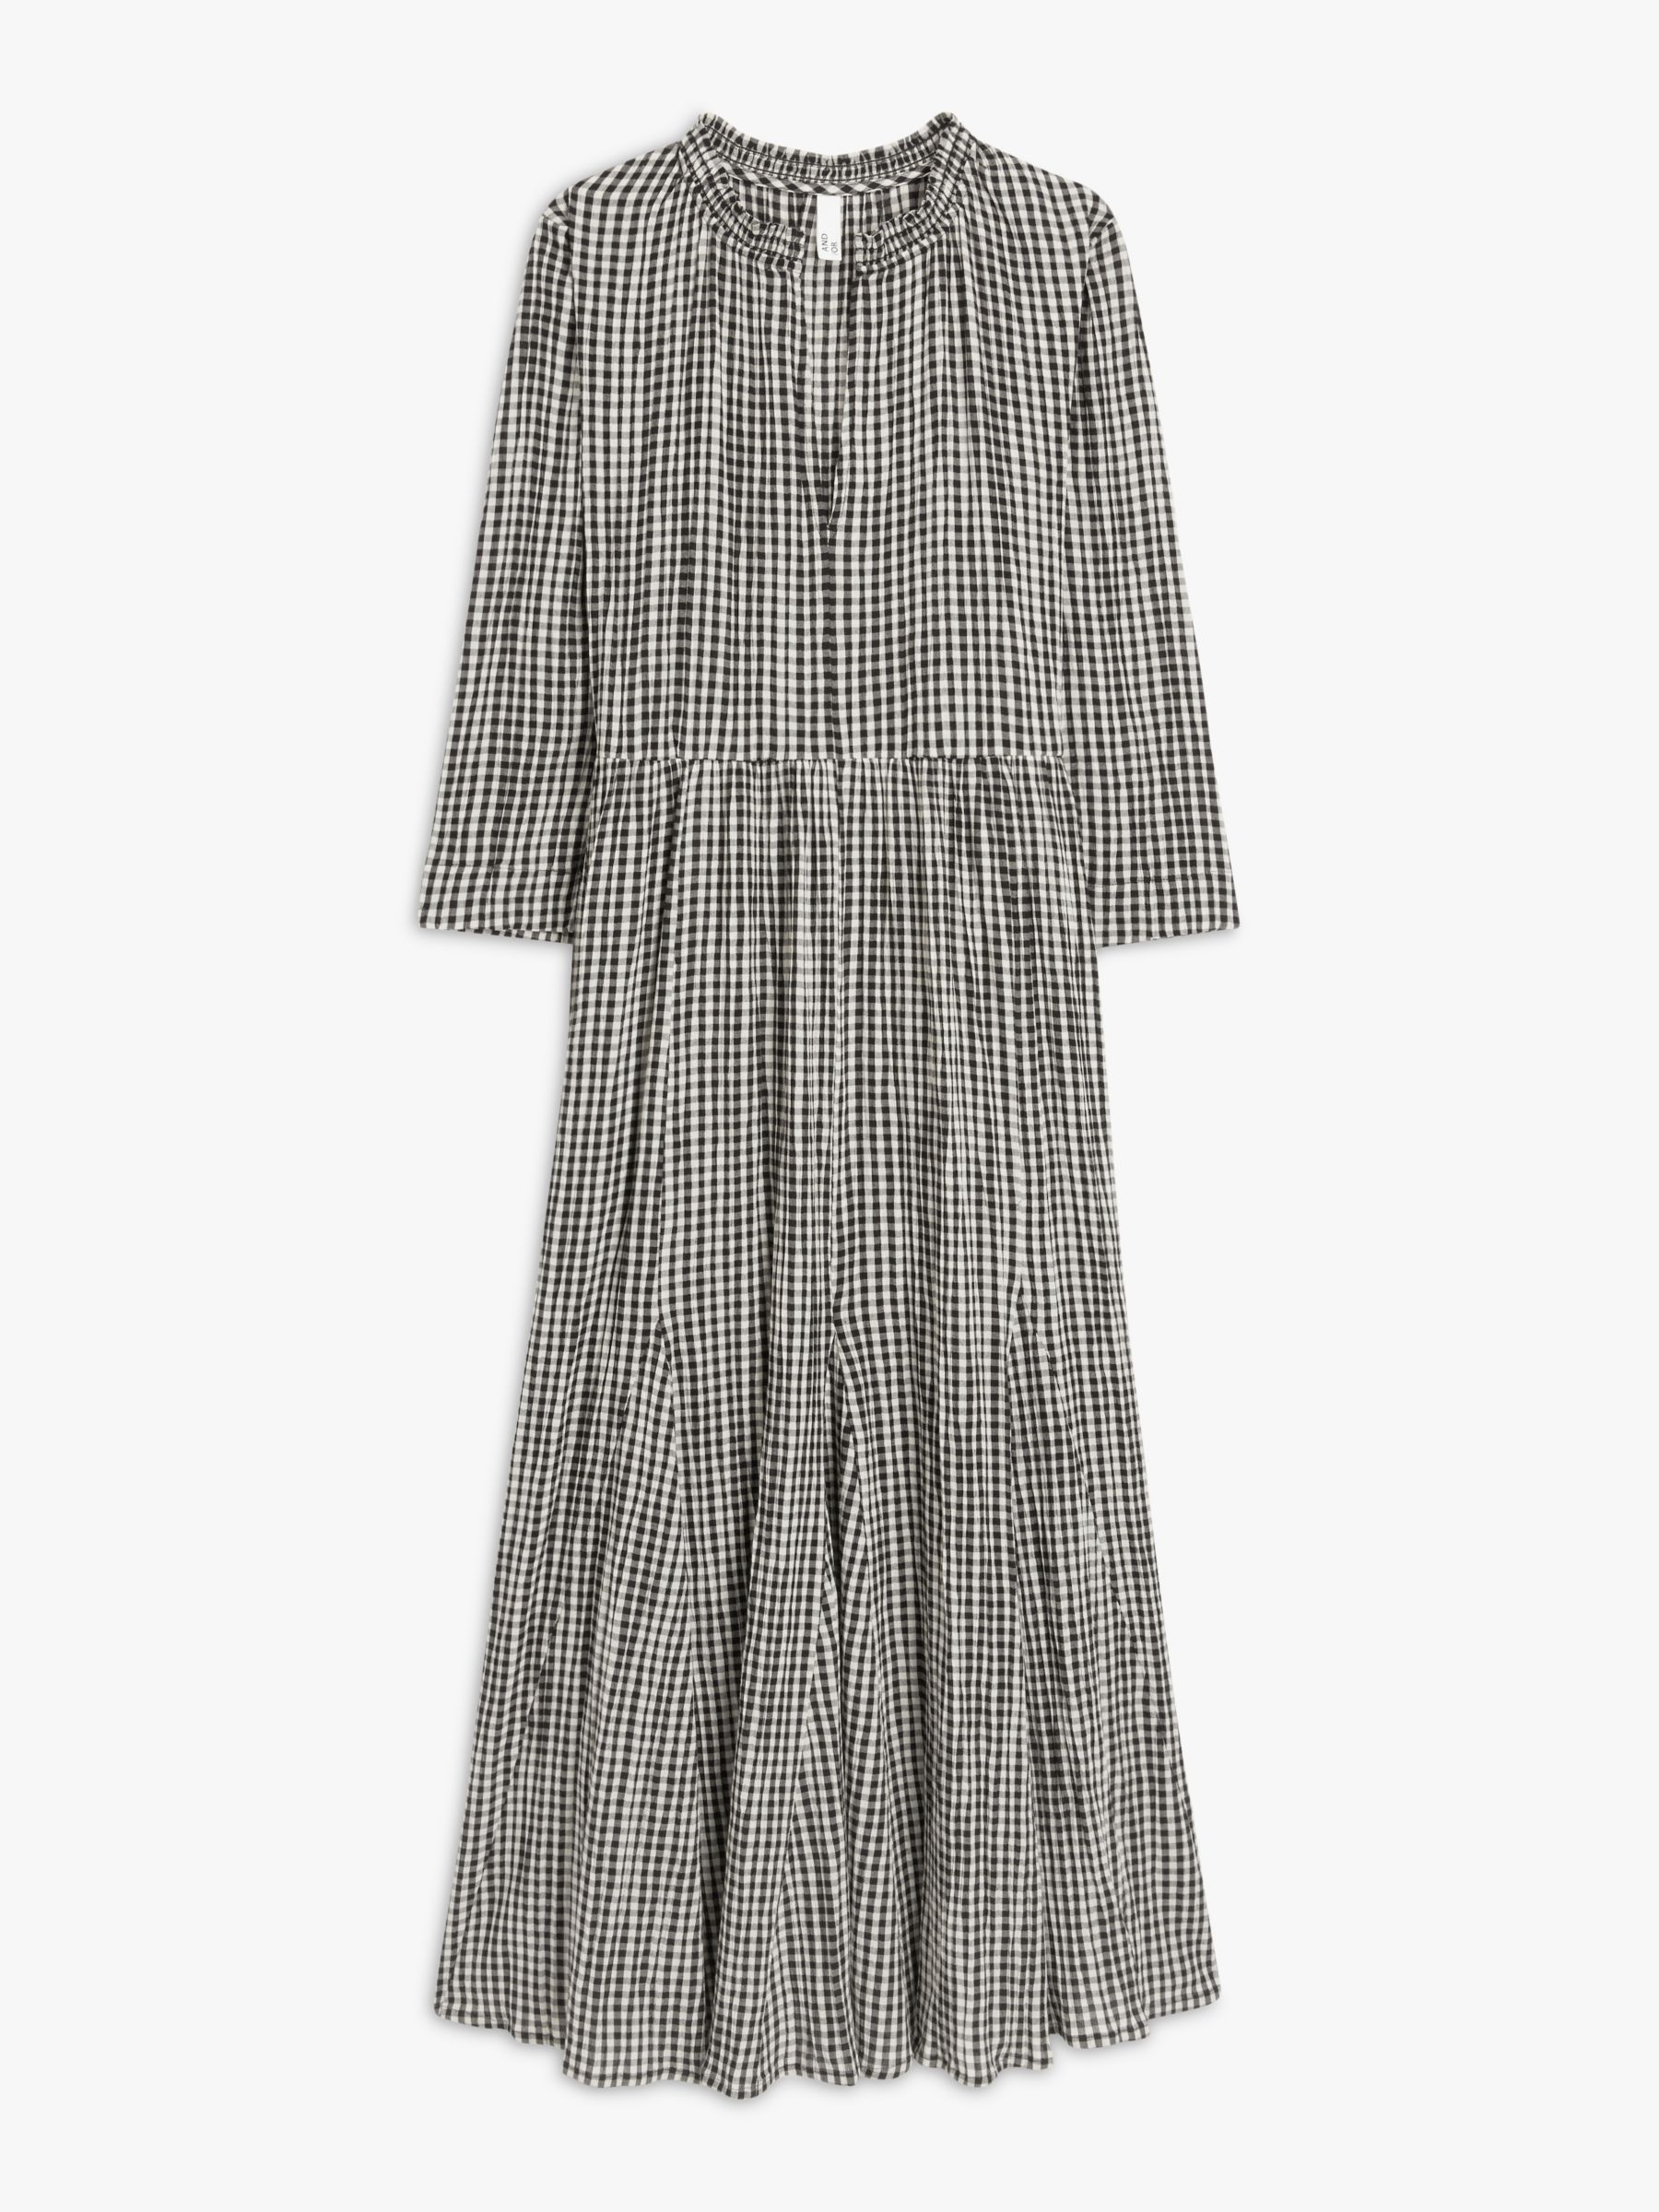 AND/OR Vanessa Gingham Smock Dress, Black/Cream at John Lewis & Partners